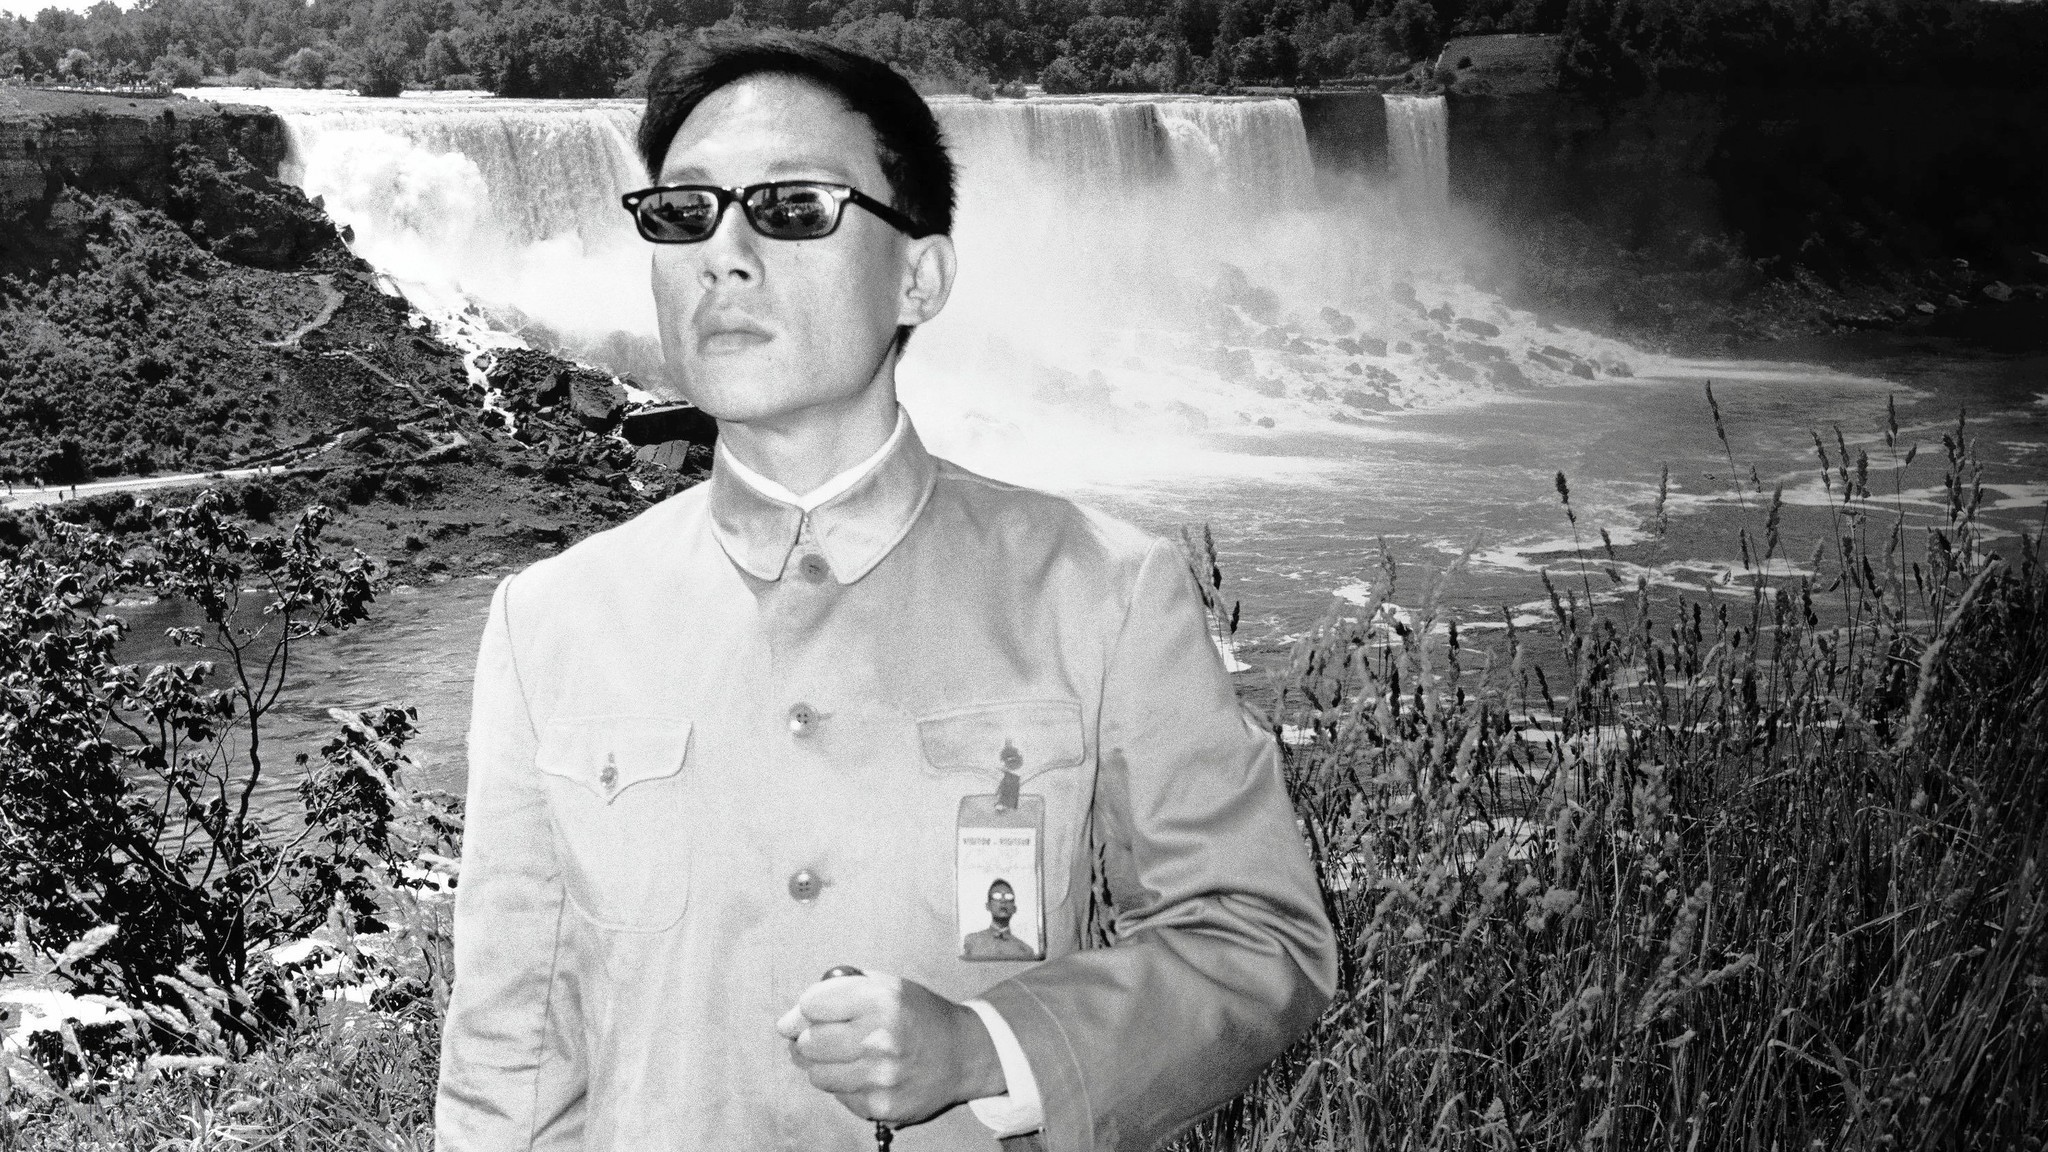 Artist photographed in Mao suit proved to be a cultural standout - Chicago Tribune